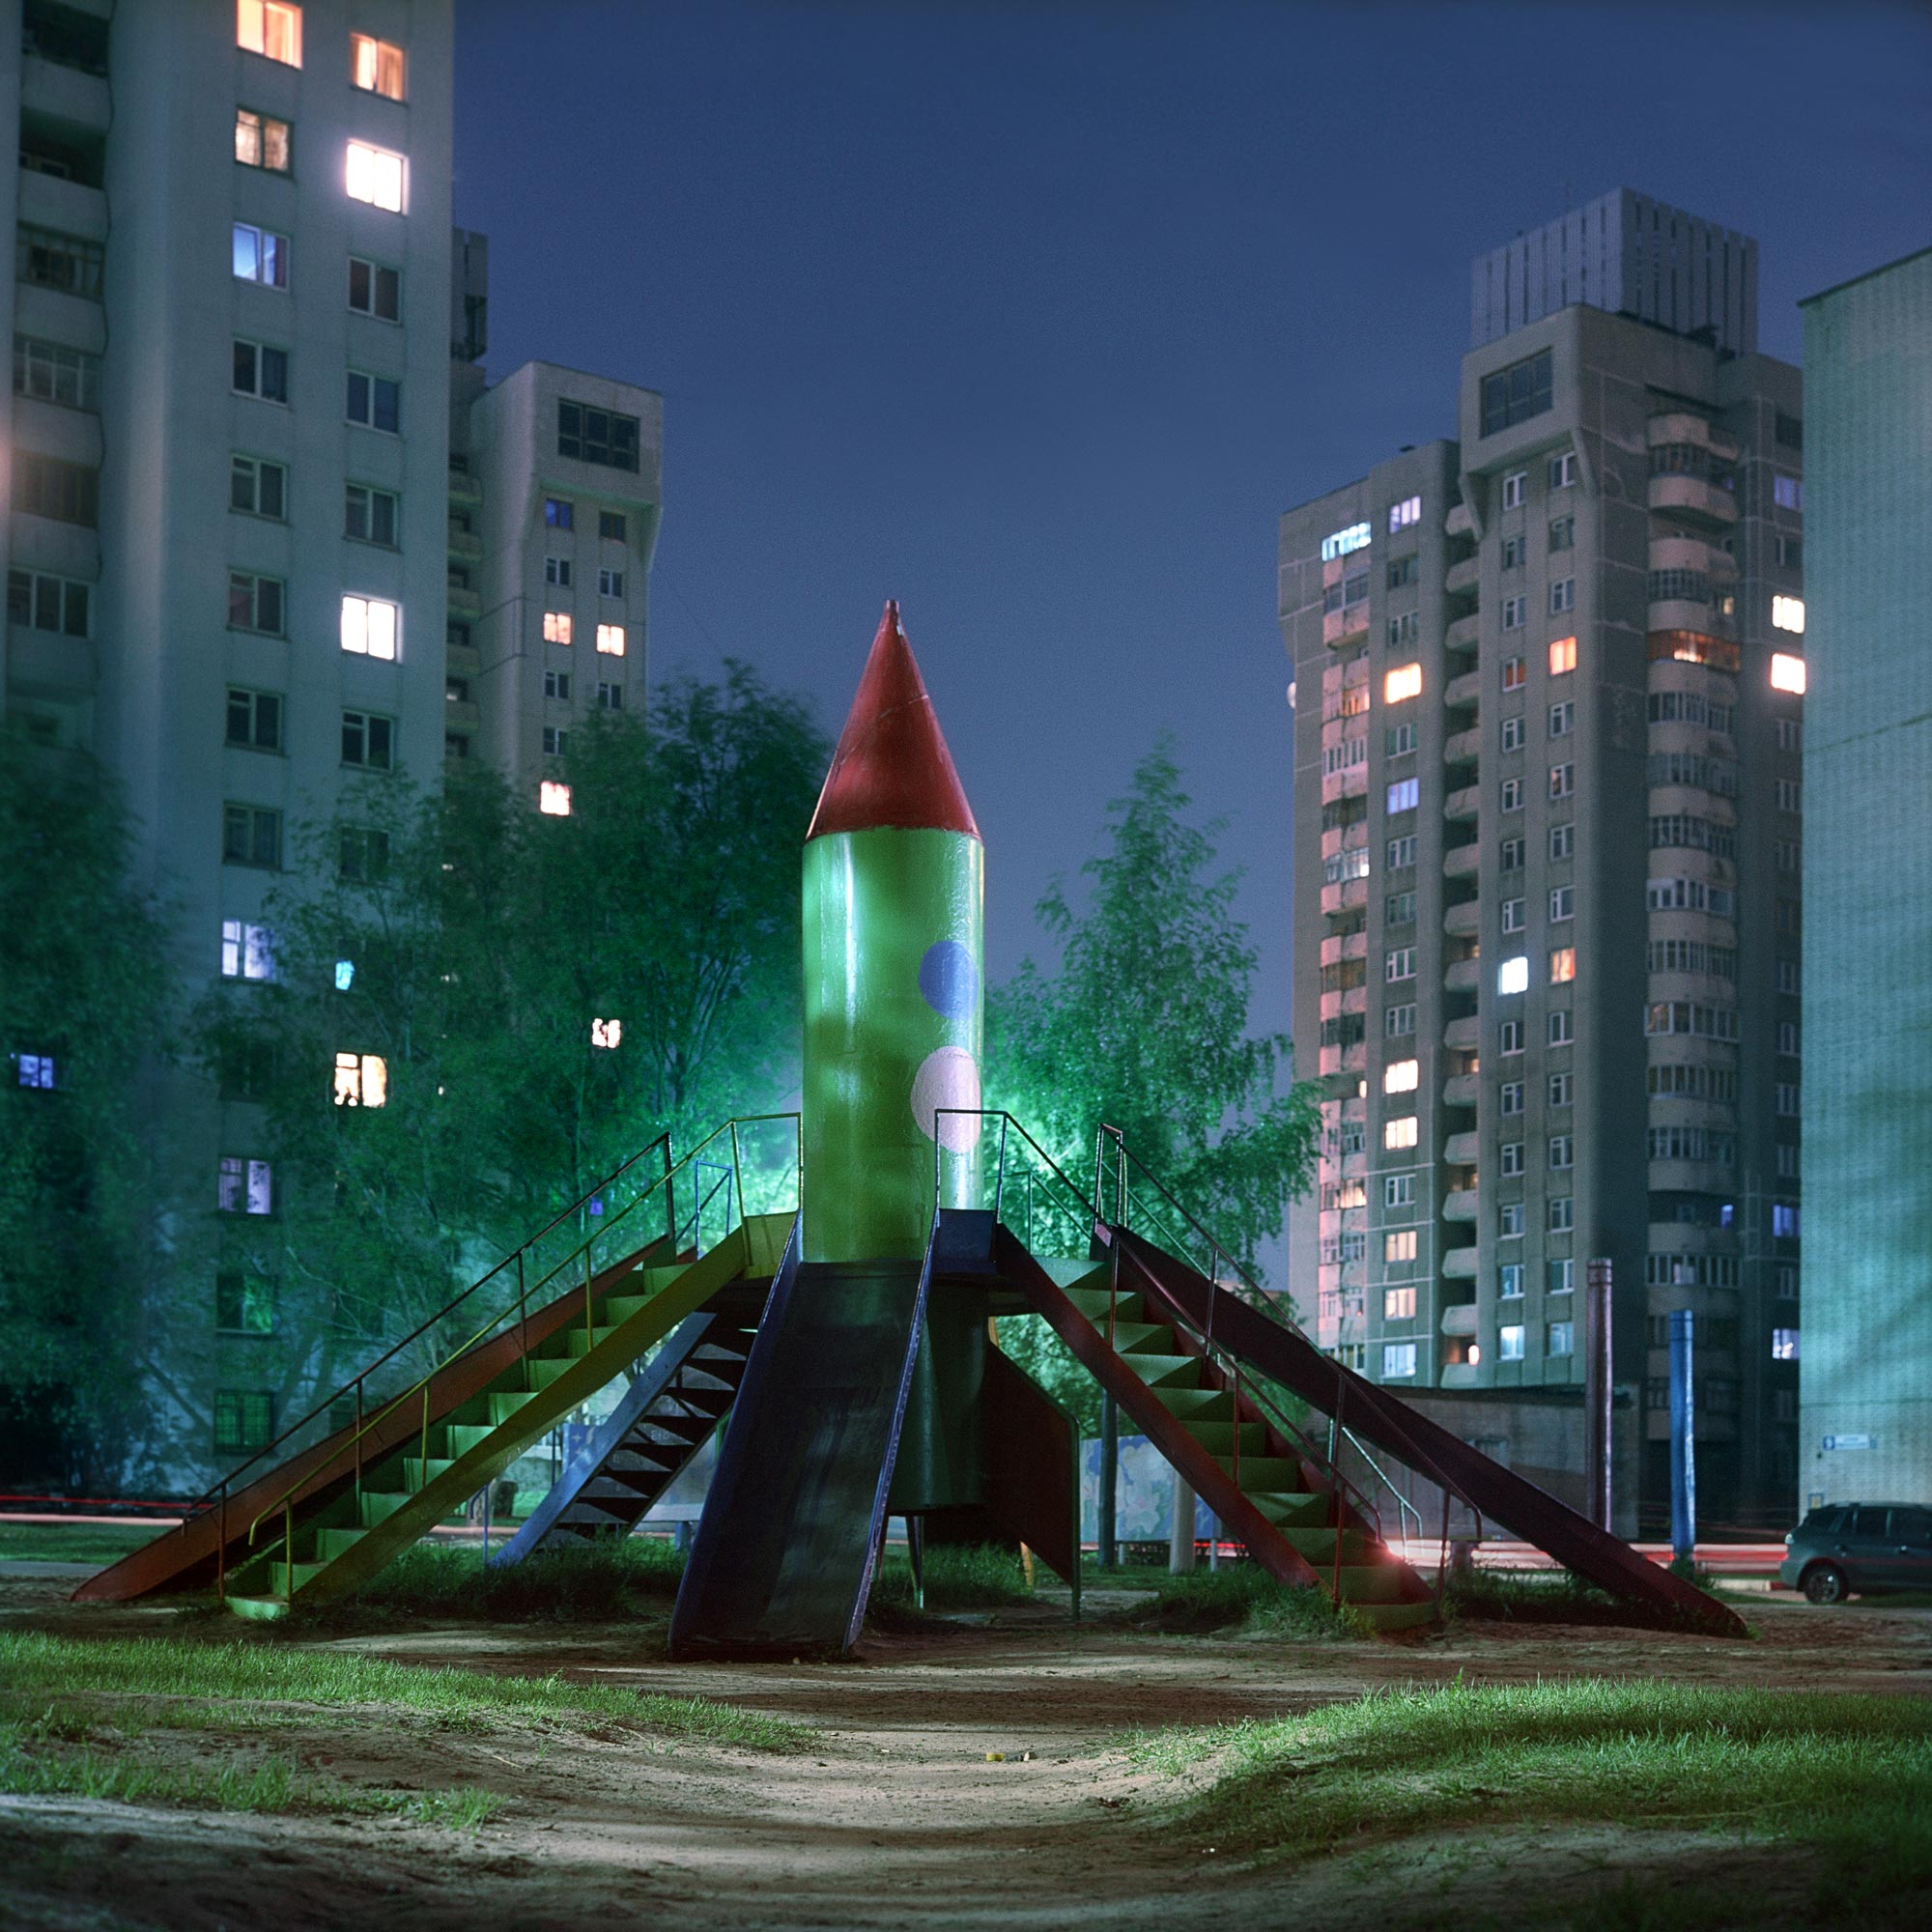 How Soviet space dreams became child’s play